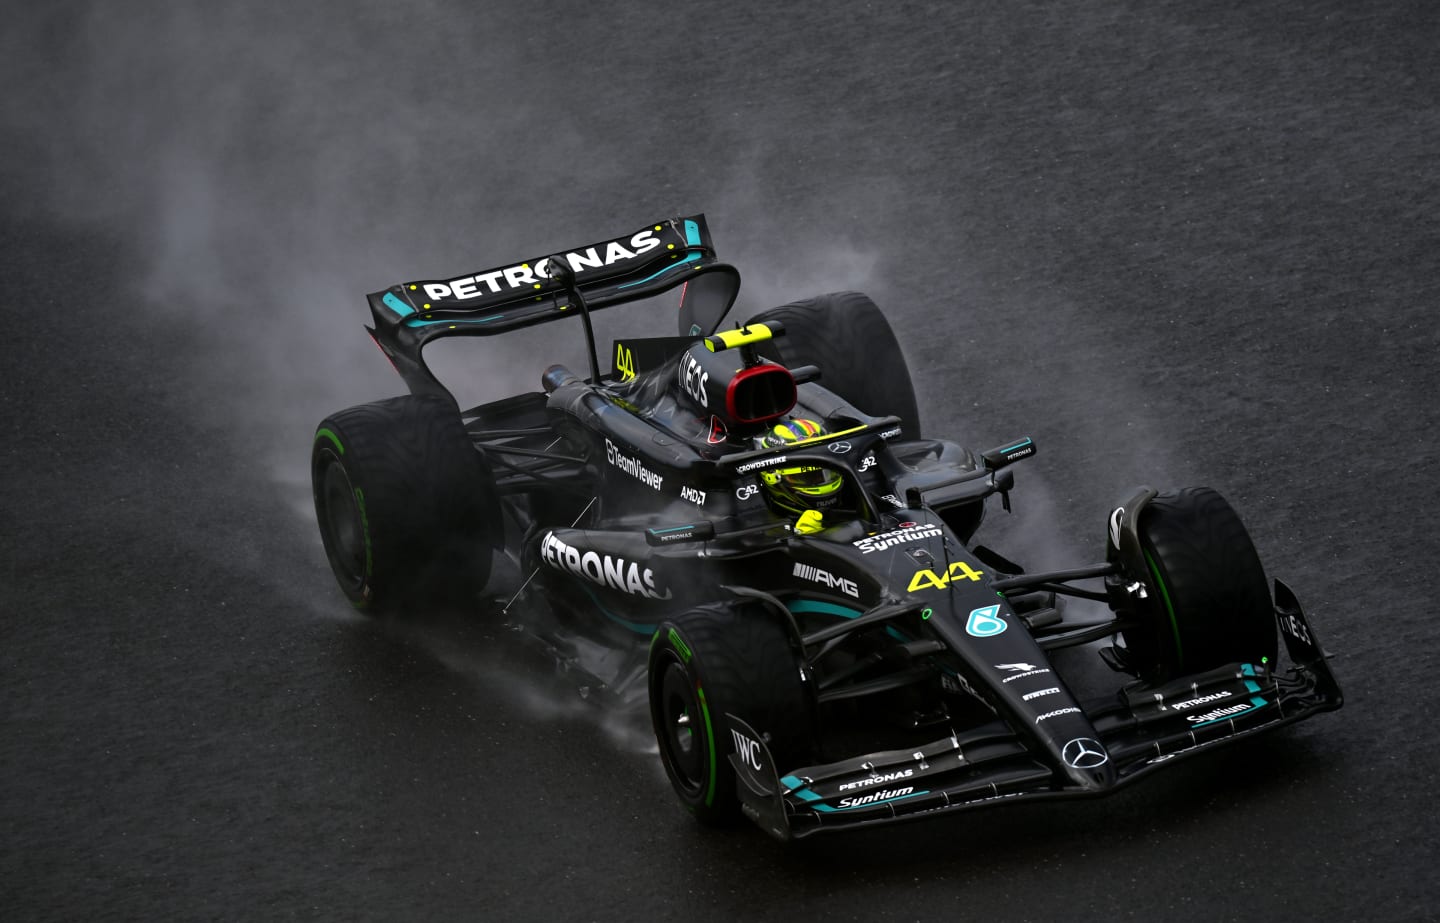 SPA, BELGIUM - JULY 29: Lewis Hamilton of Great Britain driving the (44) Mercedes AMG Petronas F1